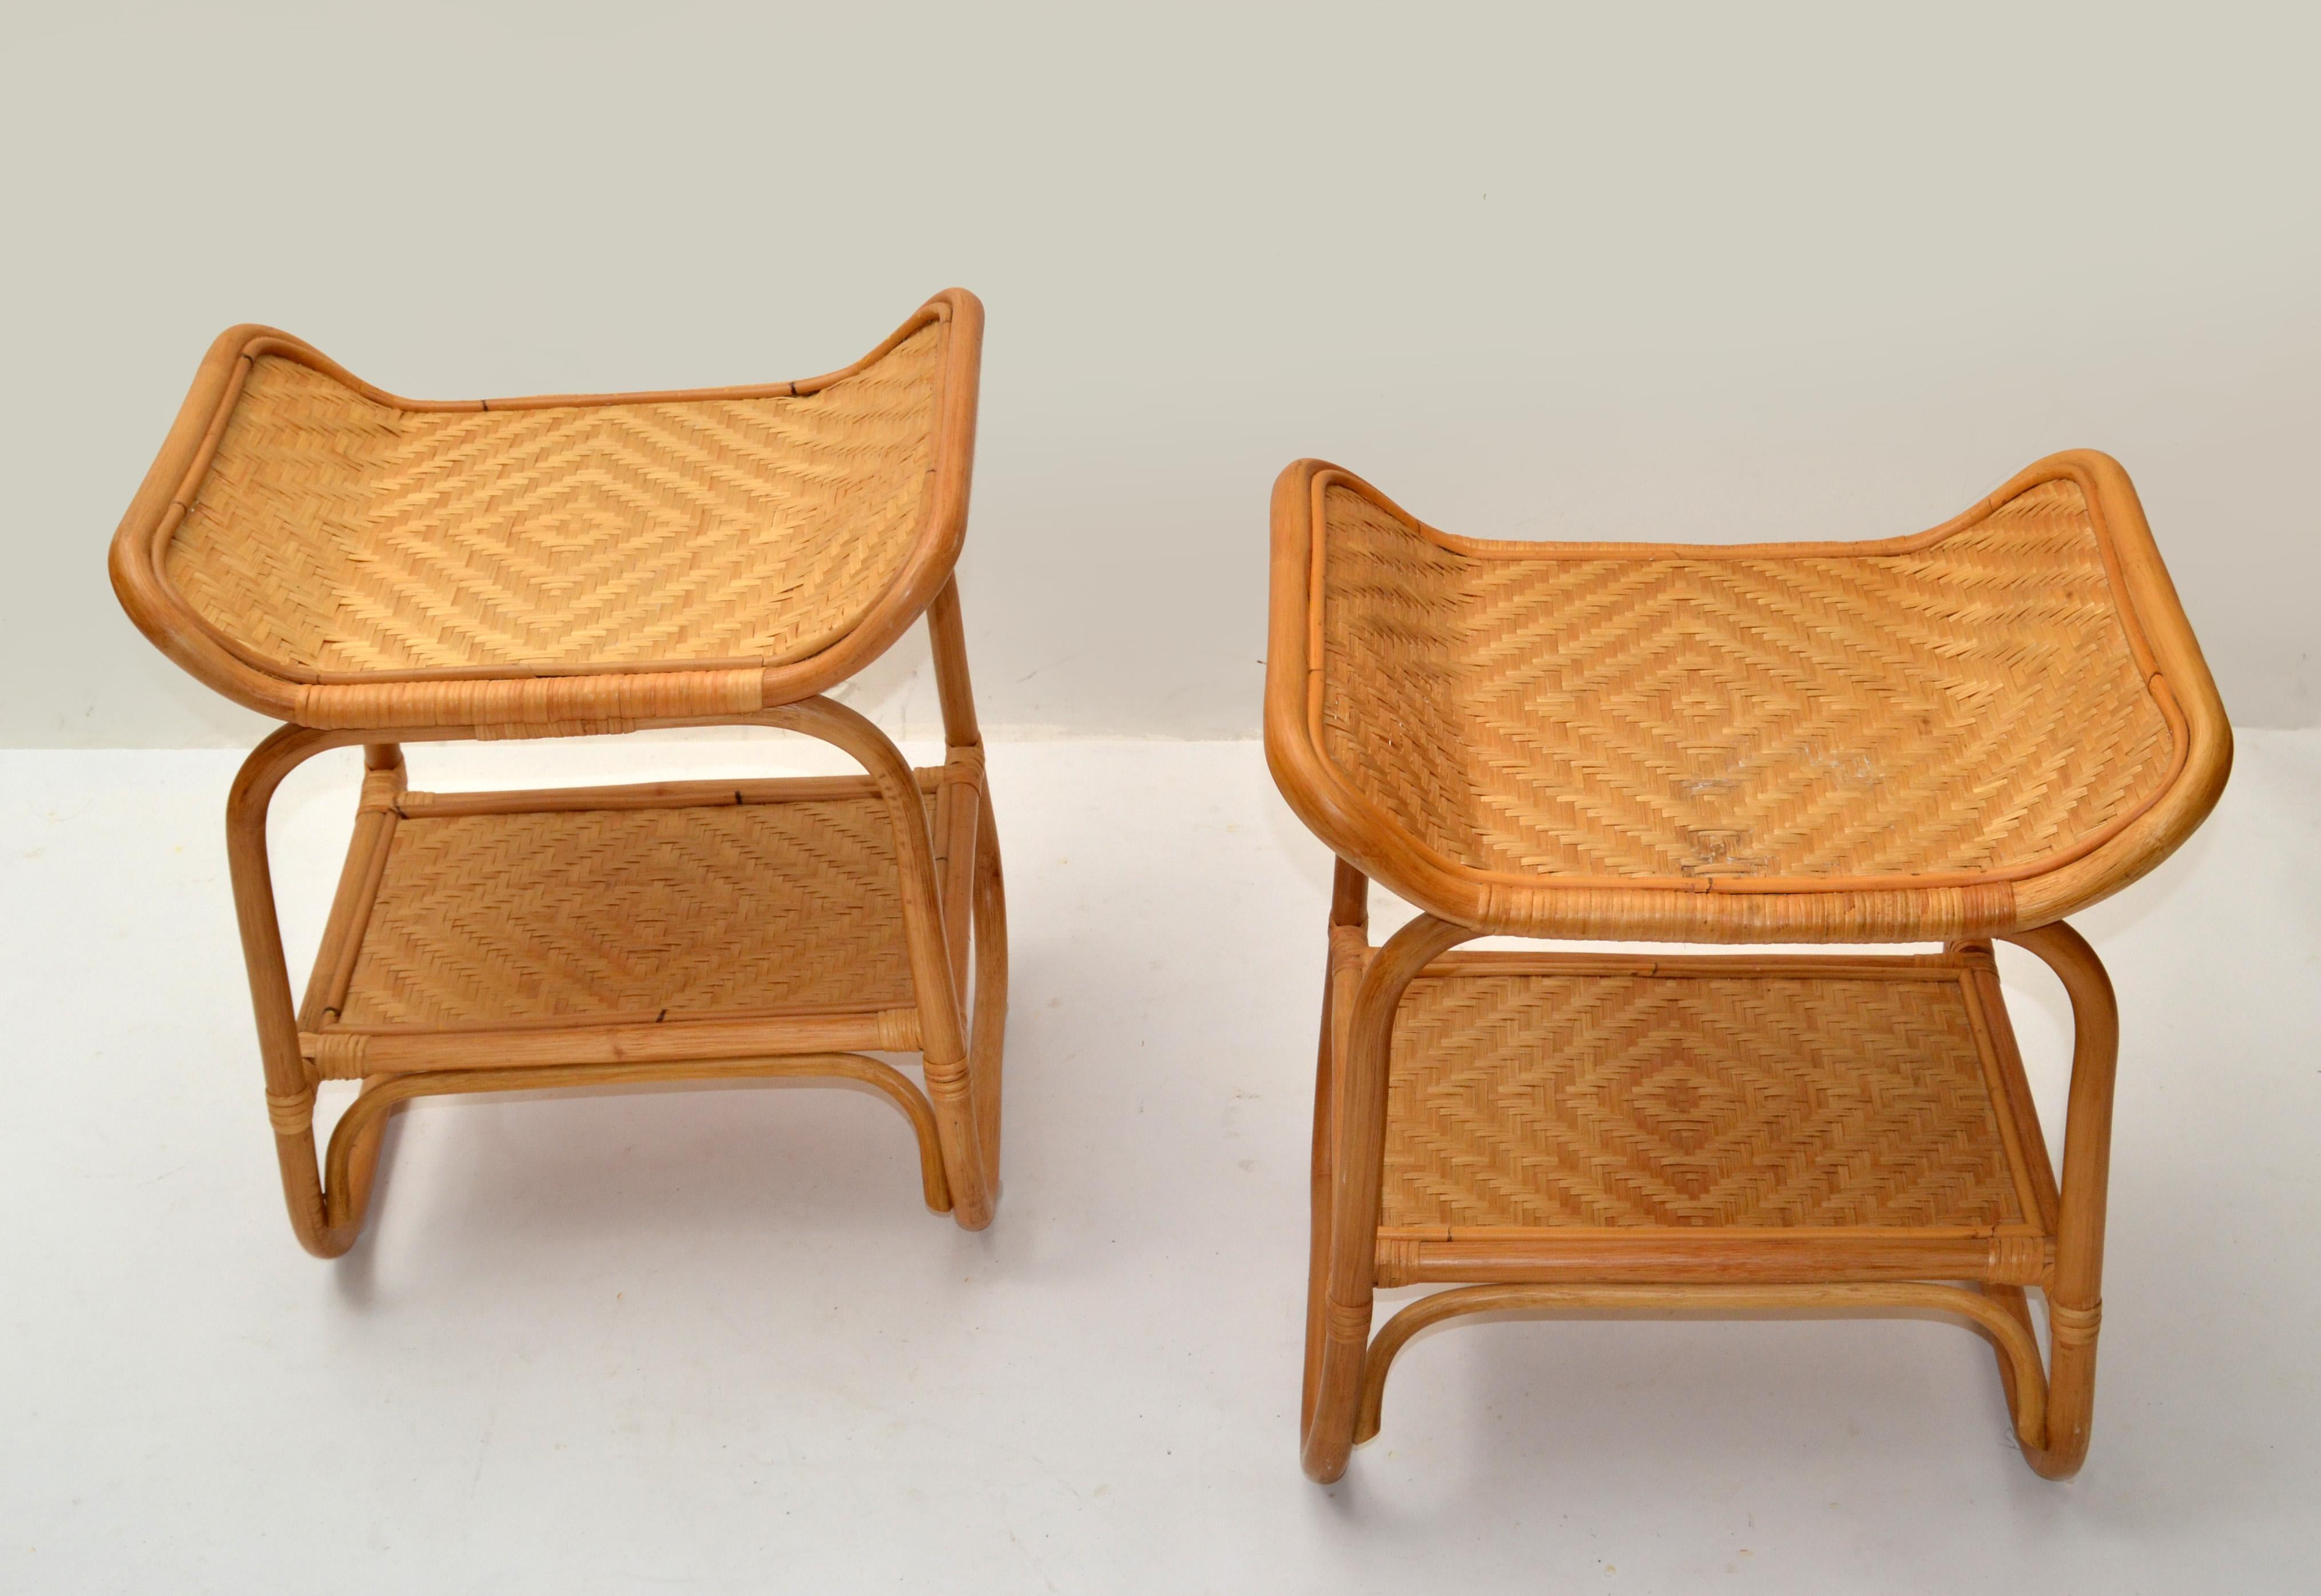 Pair, Asian Modern Handwoven Wicker & Rattan 2-Tier Side, Sofa, End Drink Tables In Good Condition For Sale In Miami, FL